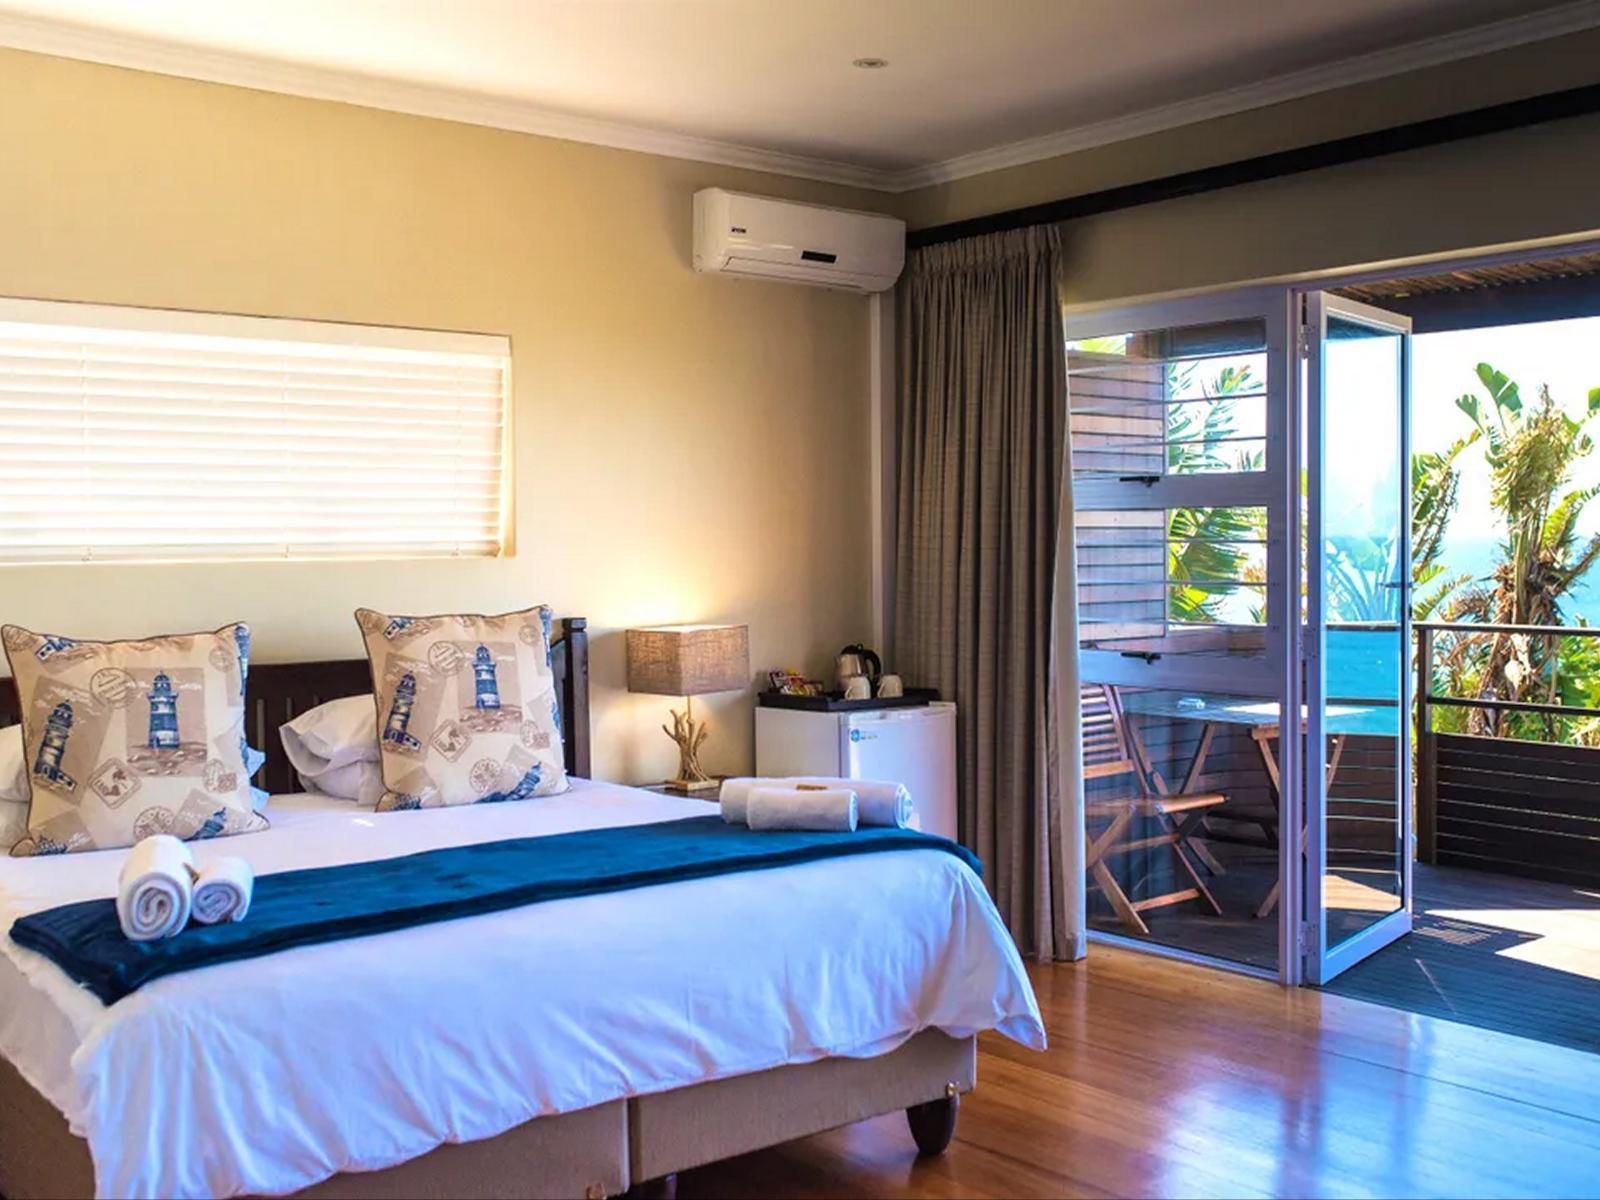 The Tides Inn Brighton Beach Durban Kwazulu Natal South Africa Complementary Colors, Bedroom